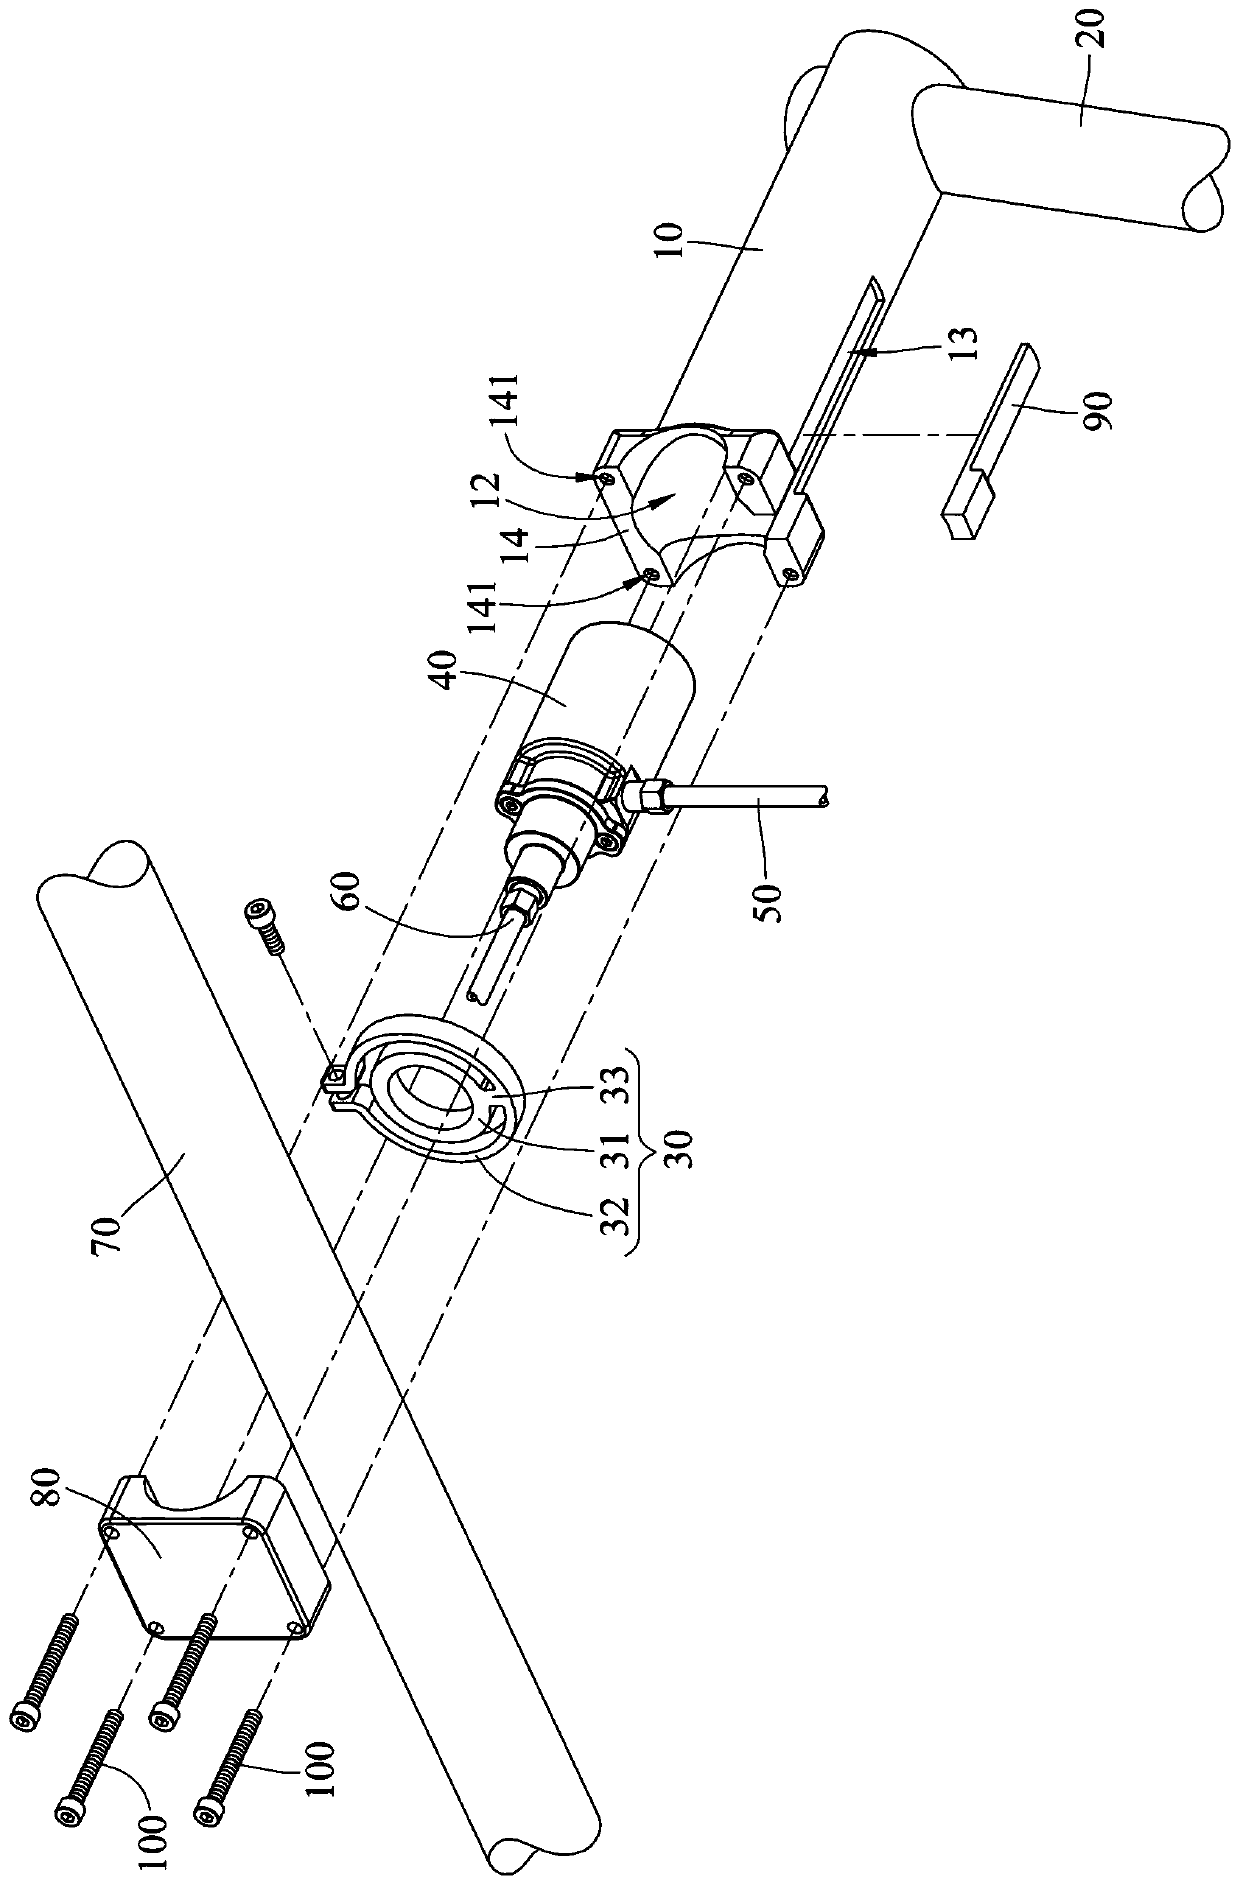 A vehicle head assembly with an anti-brake locking device